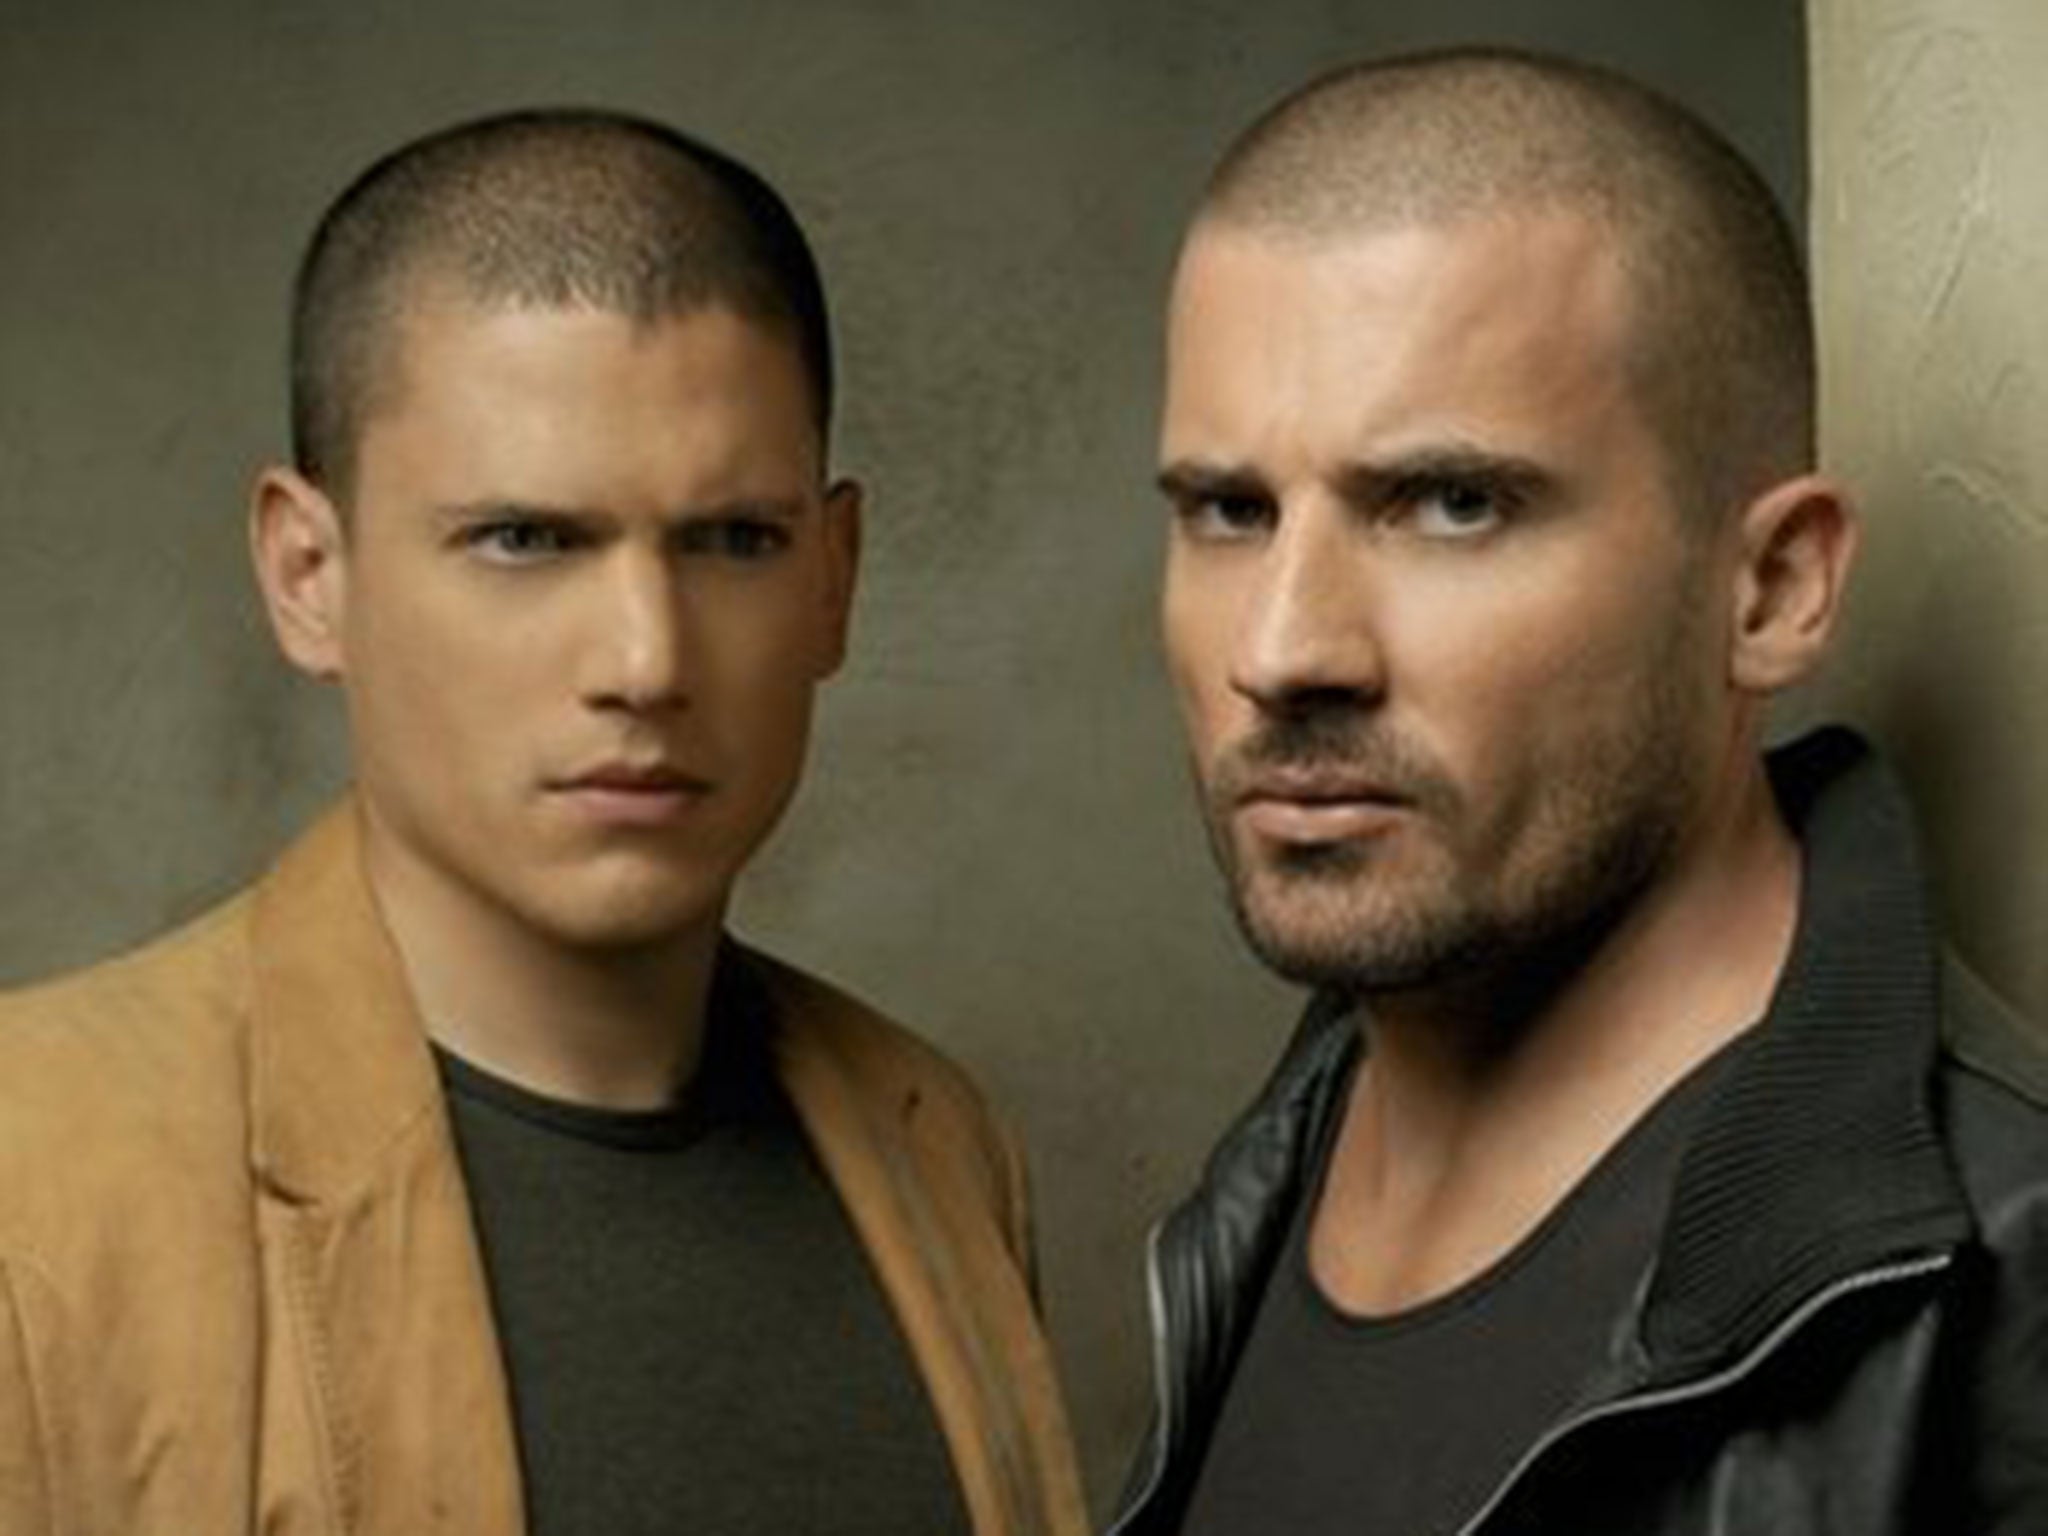 Wentworth Miller and Dominic Purcell as Michael Scofield and Lincoln Burrows in 2005's Prison Break